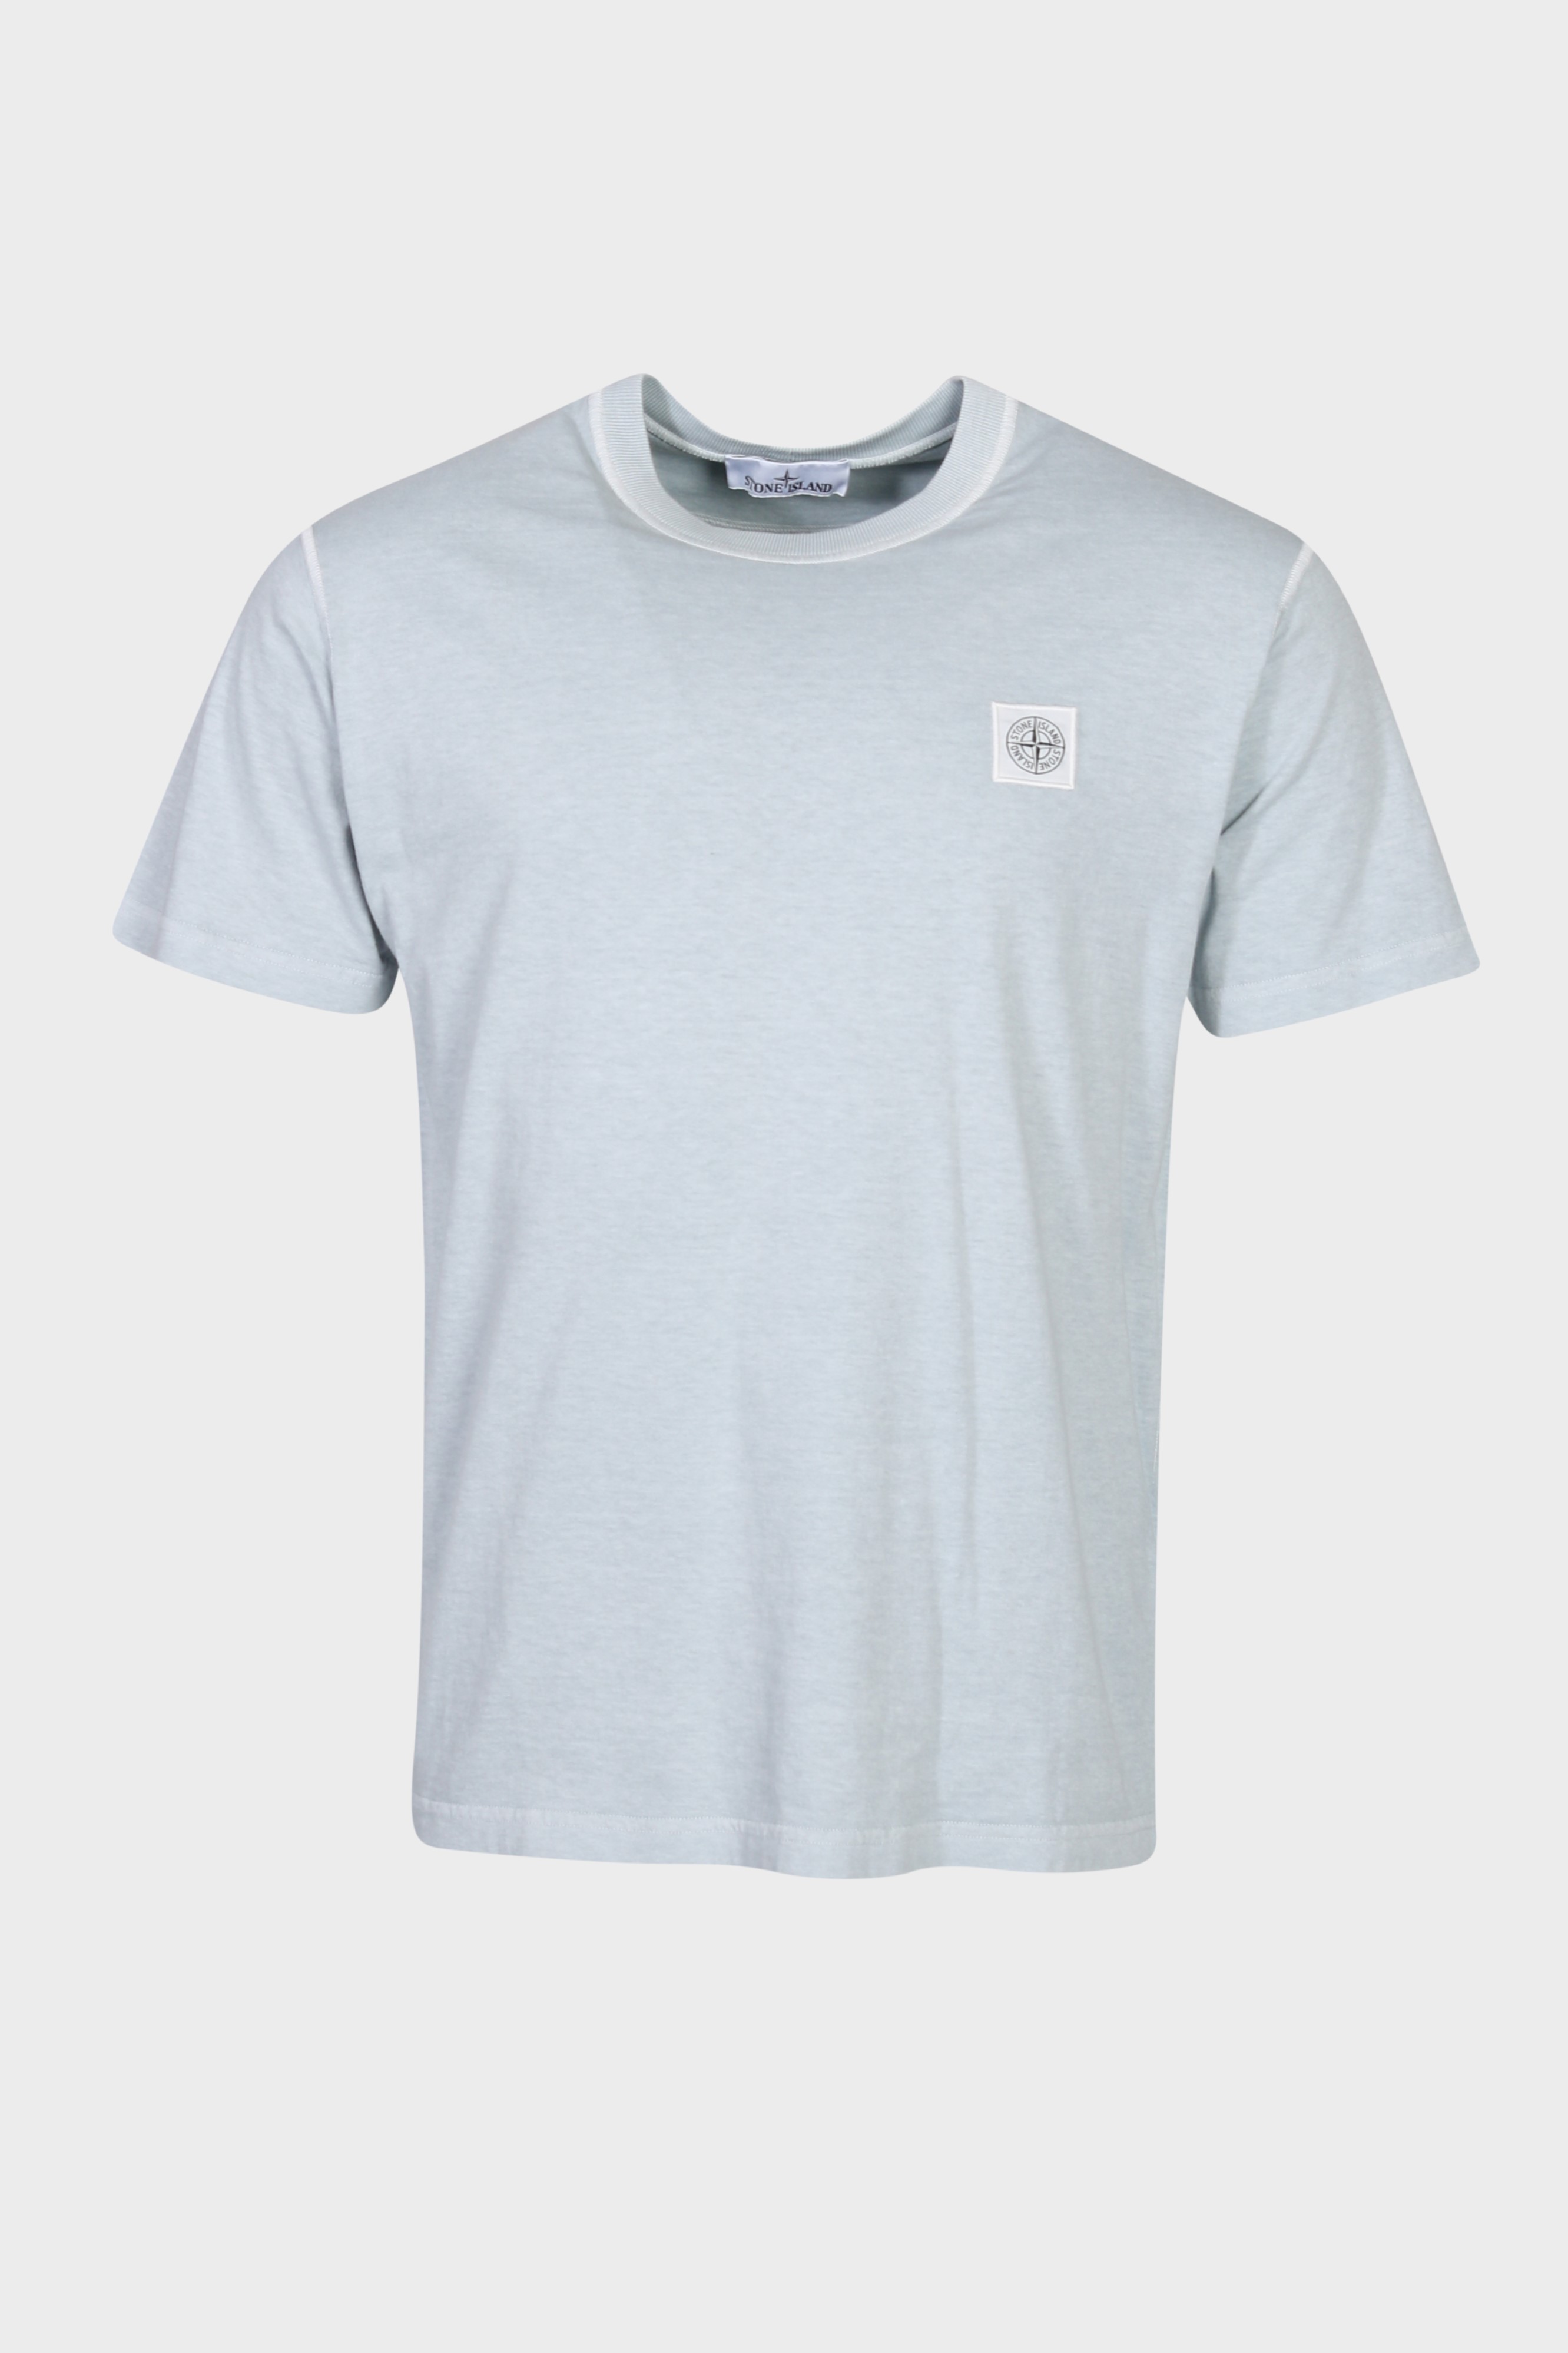 STONE ISLAND T-Shirt in Washed Sky Blue M